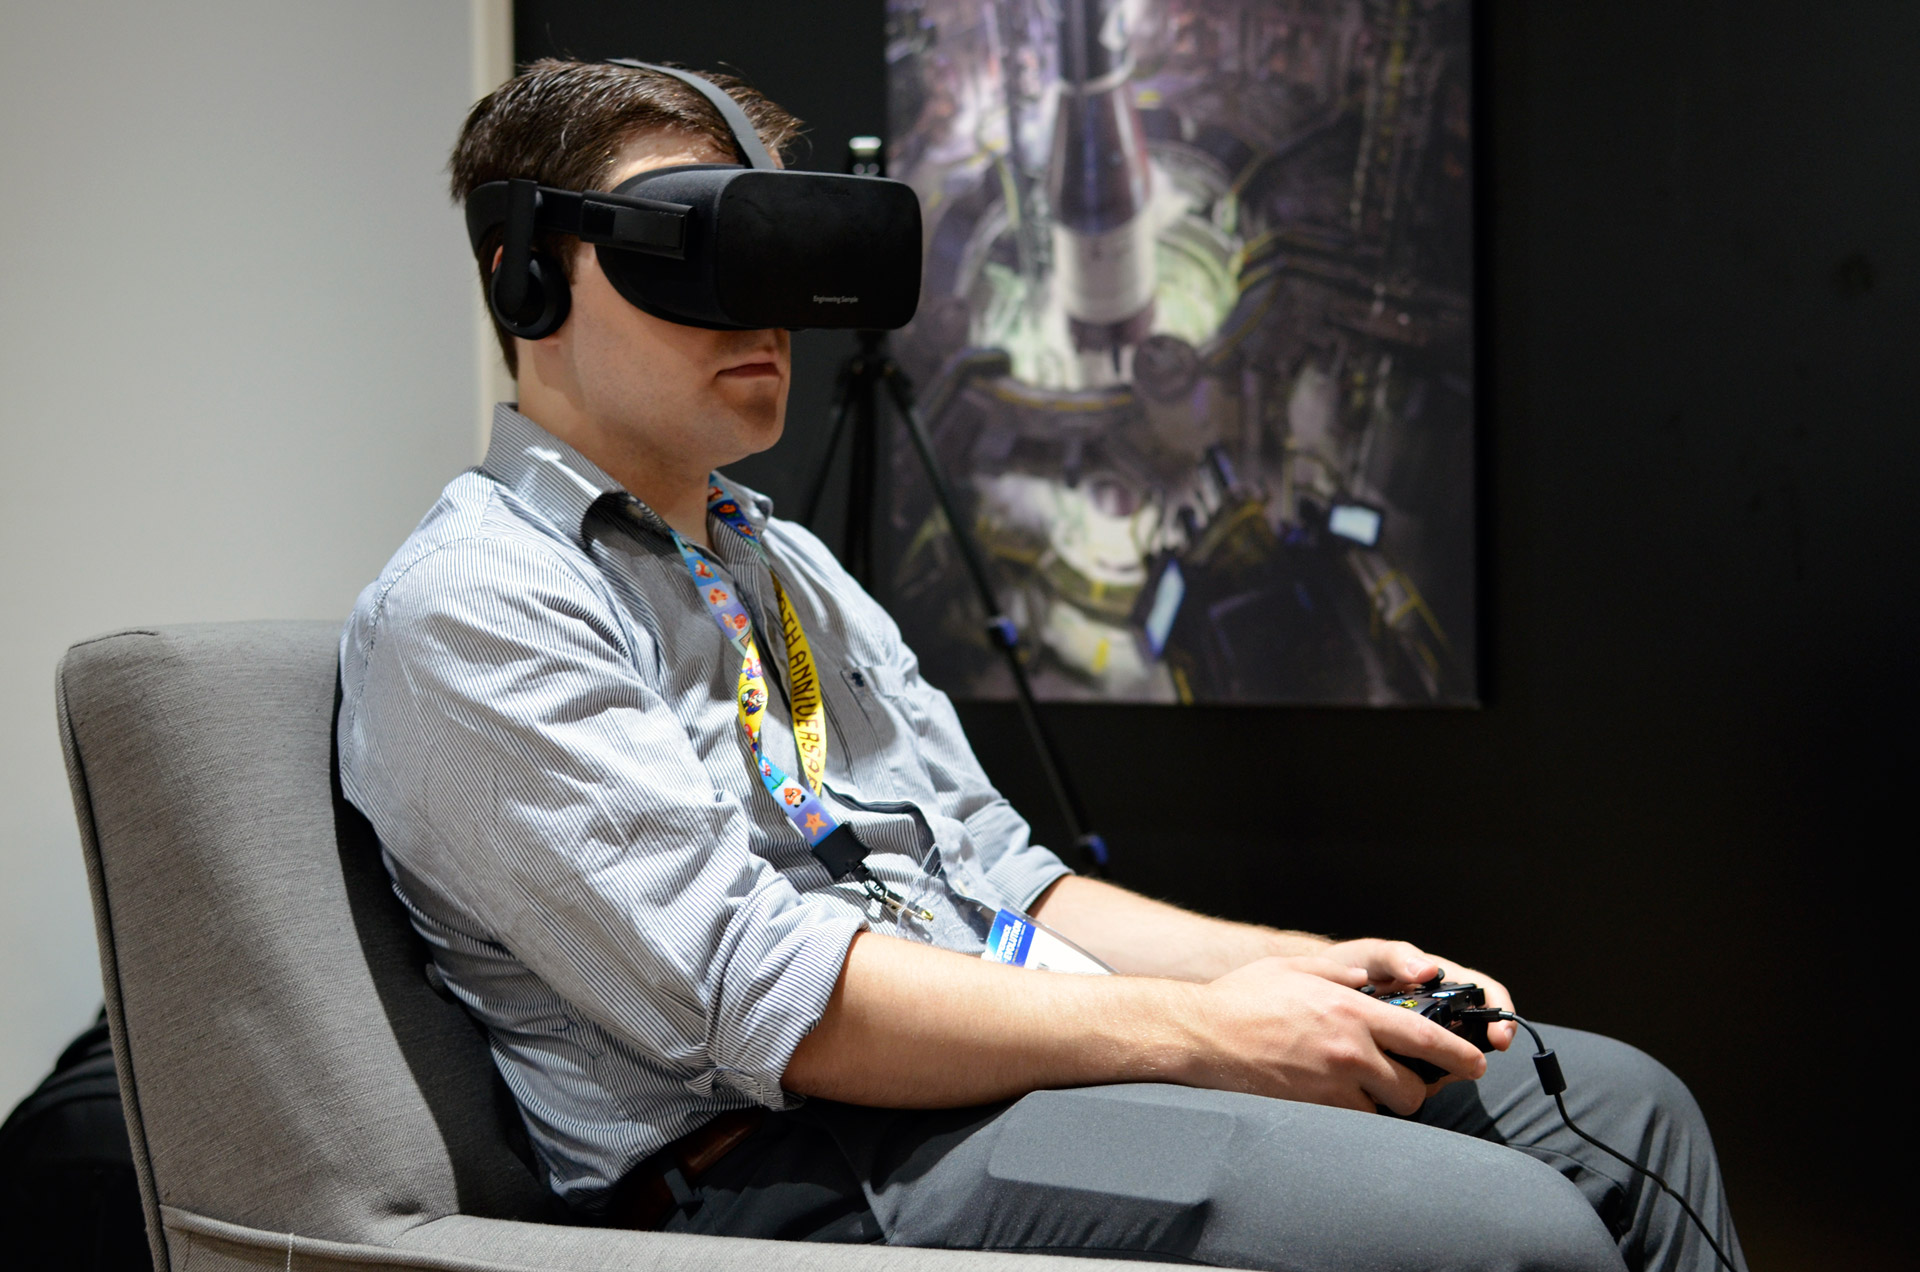 A man on his couch with a VR headset turning his head while holding a controller